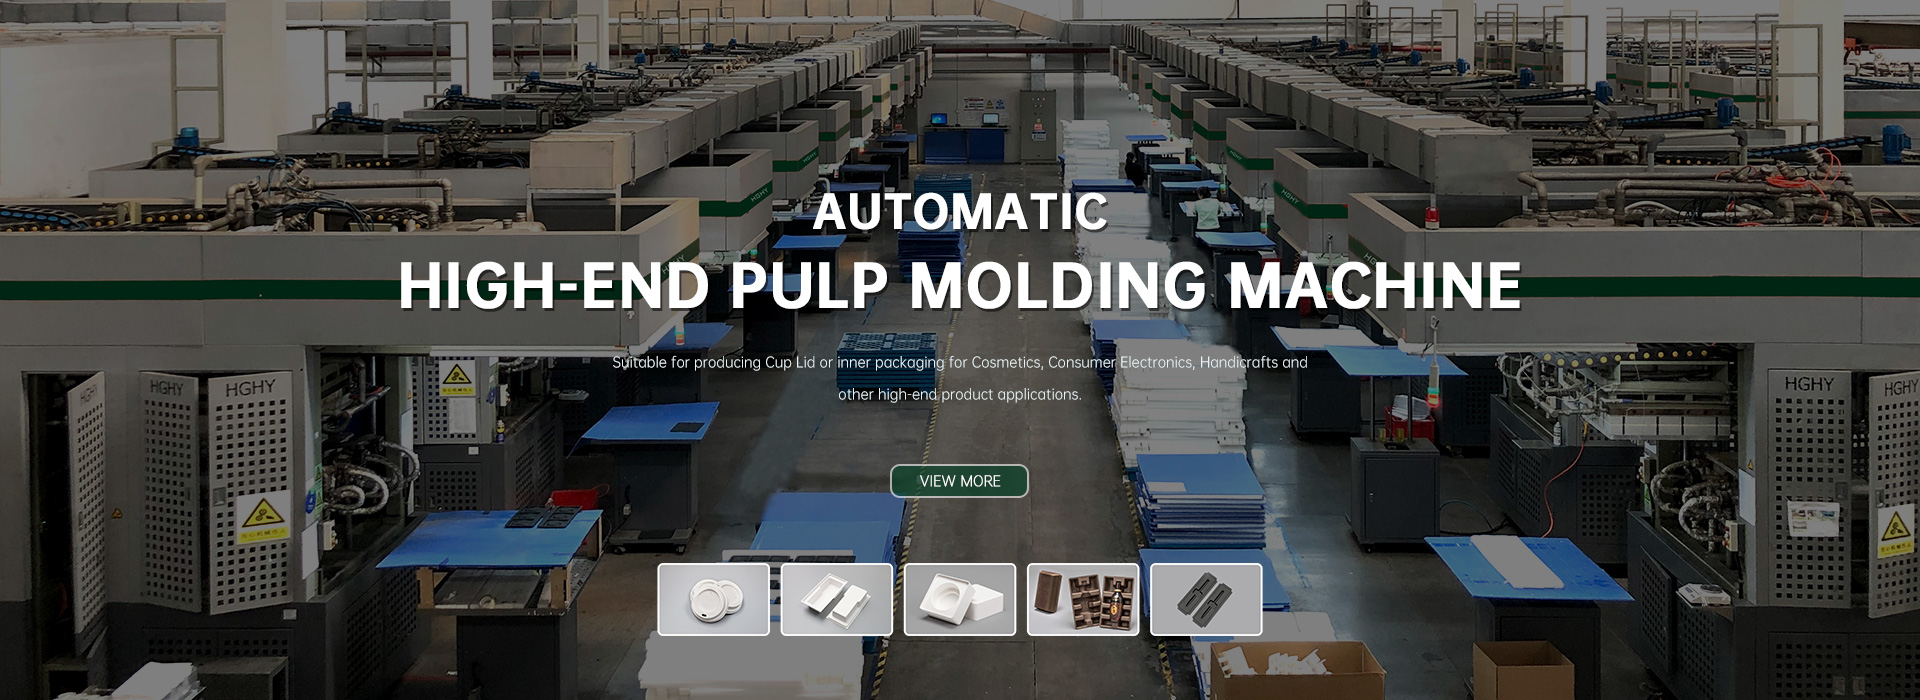 Pulp Molding High-end Packaging / Cup Lid machine